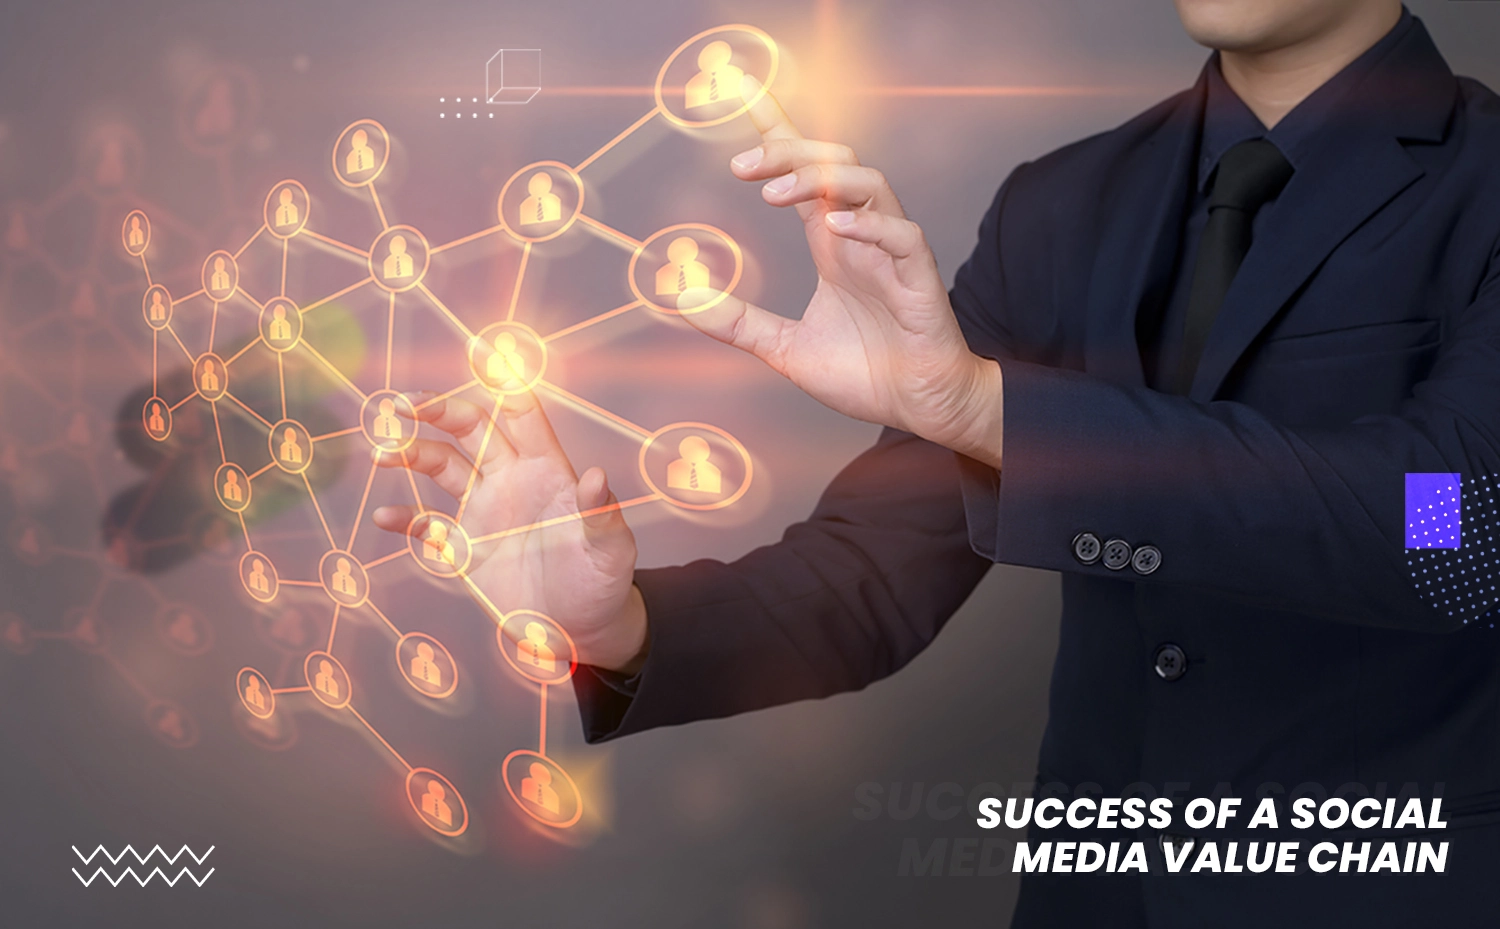 Measure the Success of a Social Media Value Chain